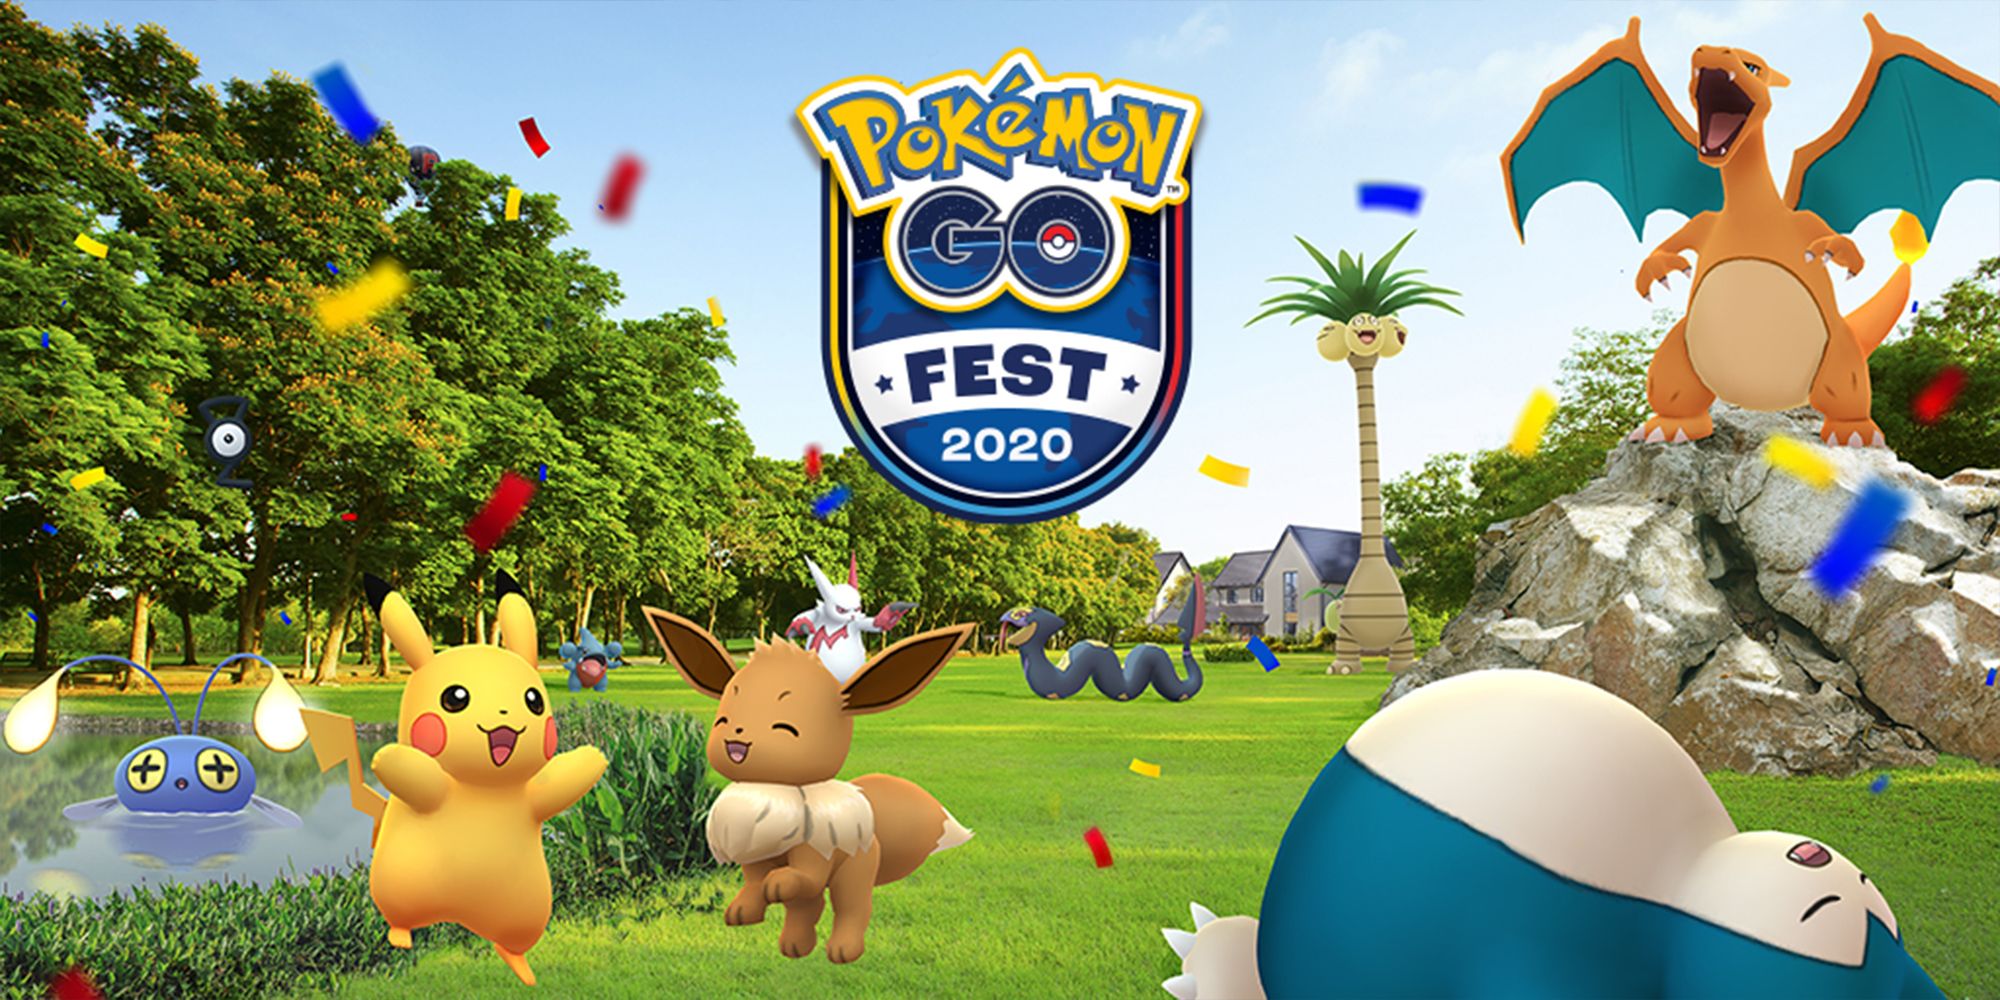 Pokémon GO Fest 2020 Tickets (How to Buy Them & What to Expect)